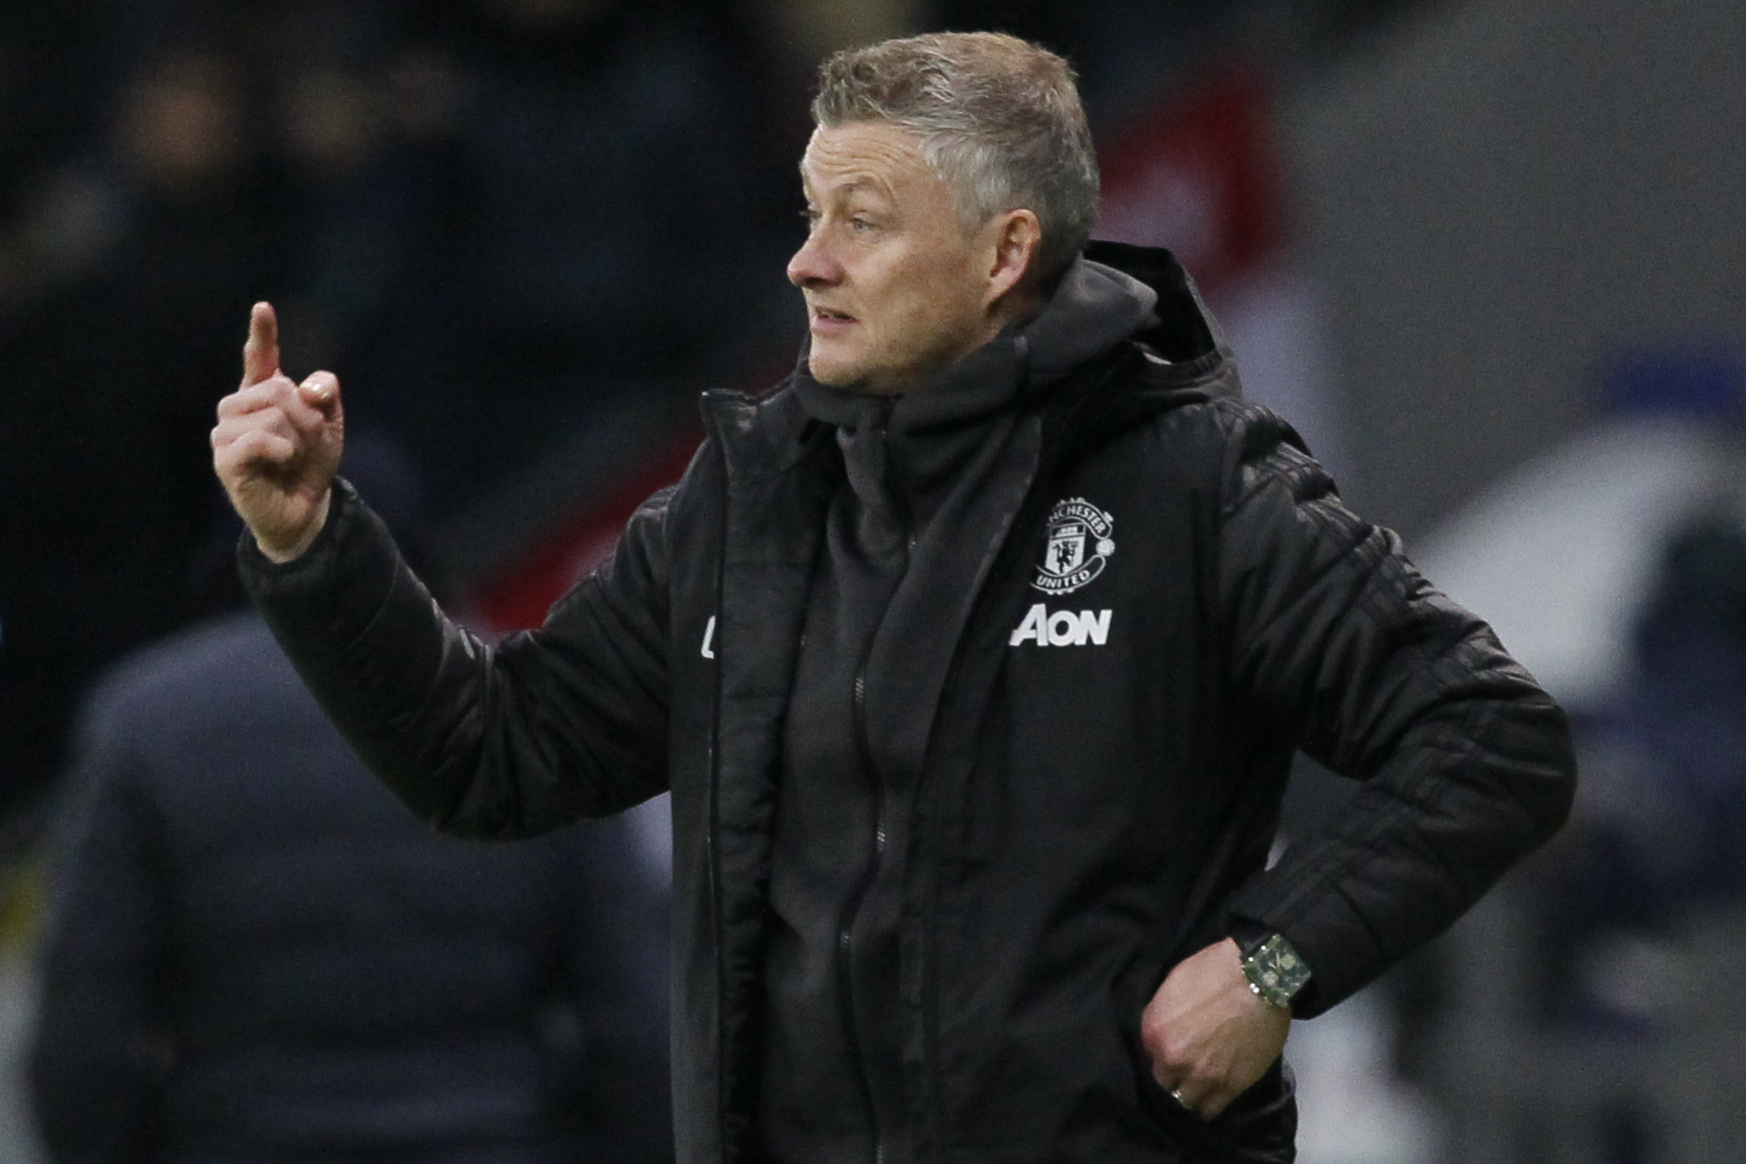 Ole Gunnar Solskjaer has given youngsters plenty of chances at Manchester United (Photo by STRINGER/AFP via Getty Images)